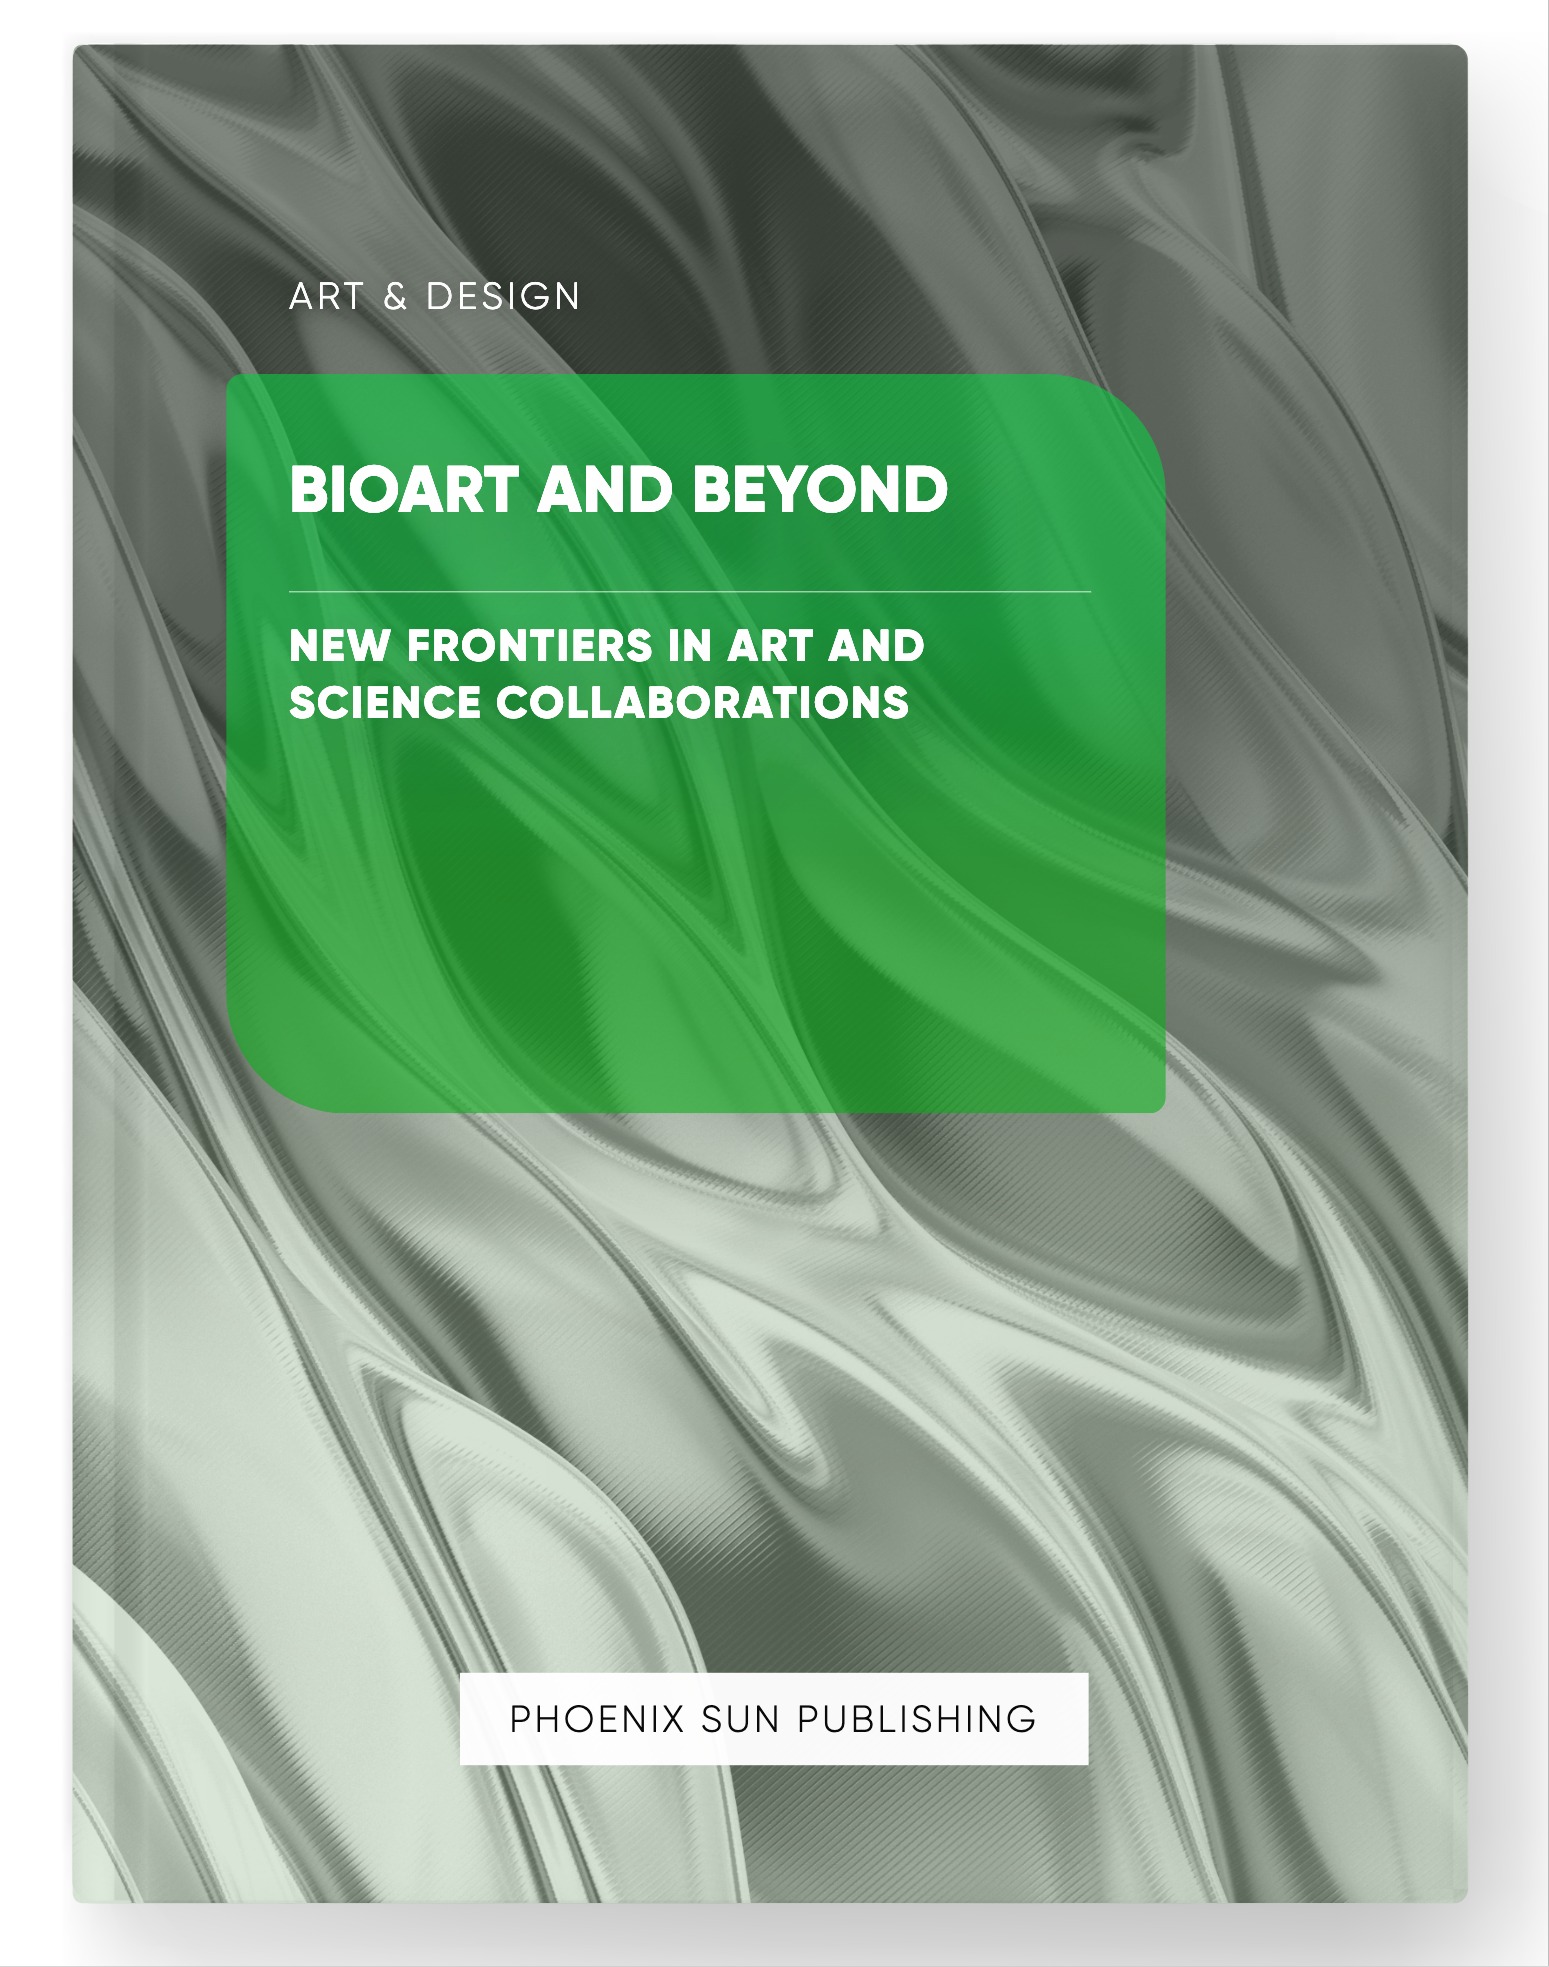 BioArt and Beyond – New Frontiers in Art and Science Collaborations